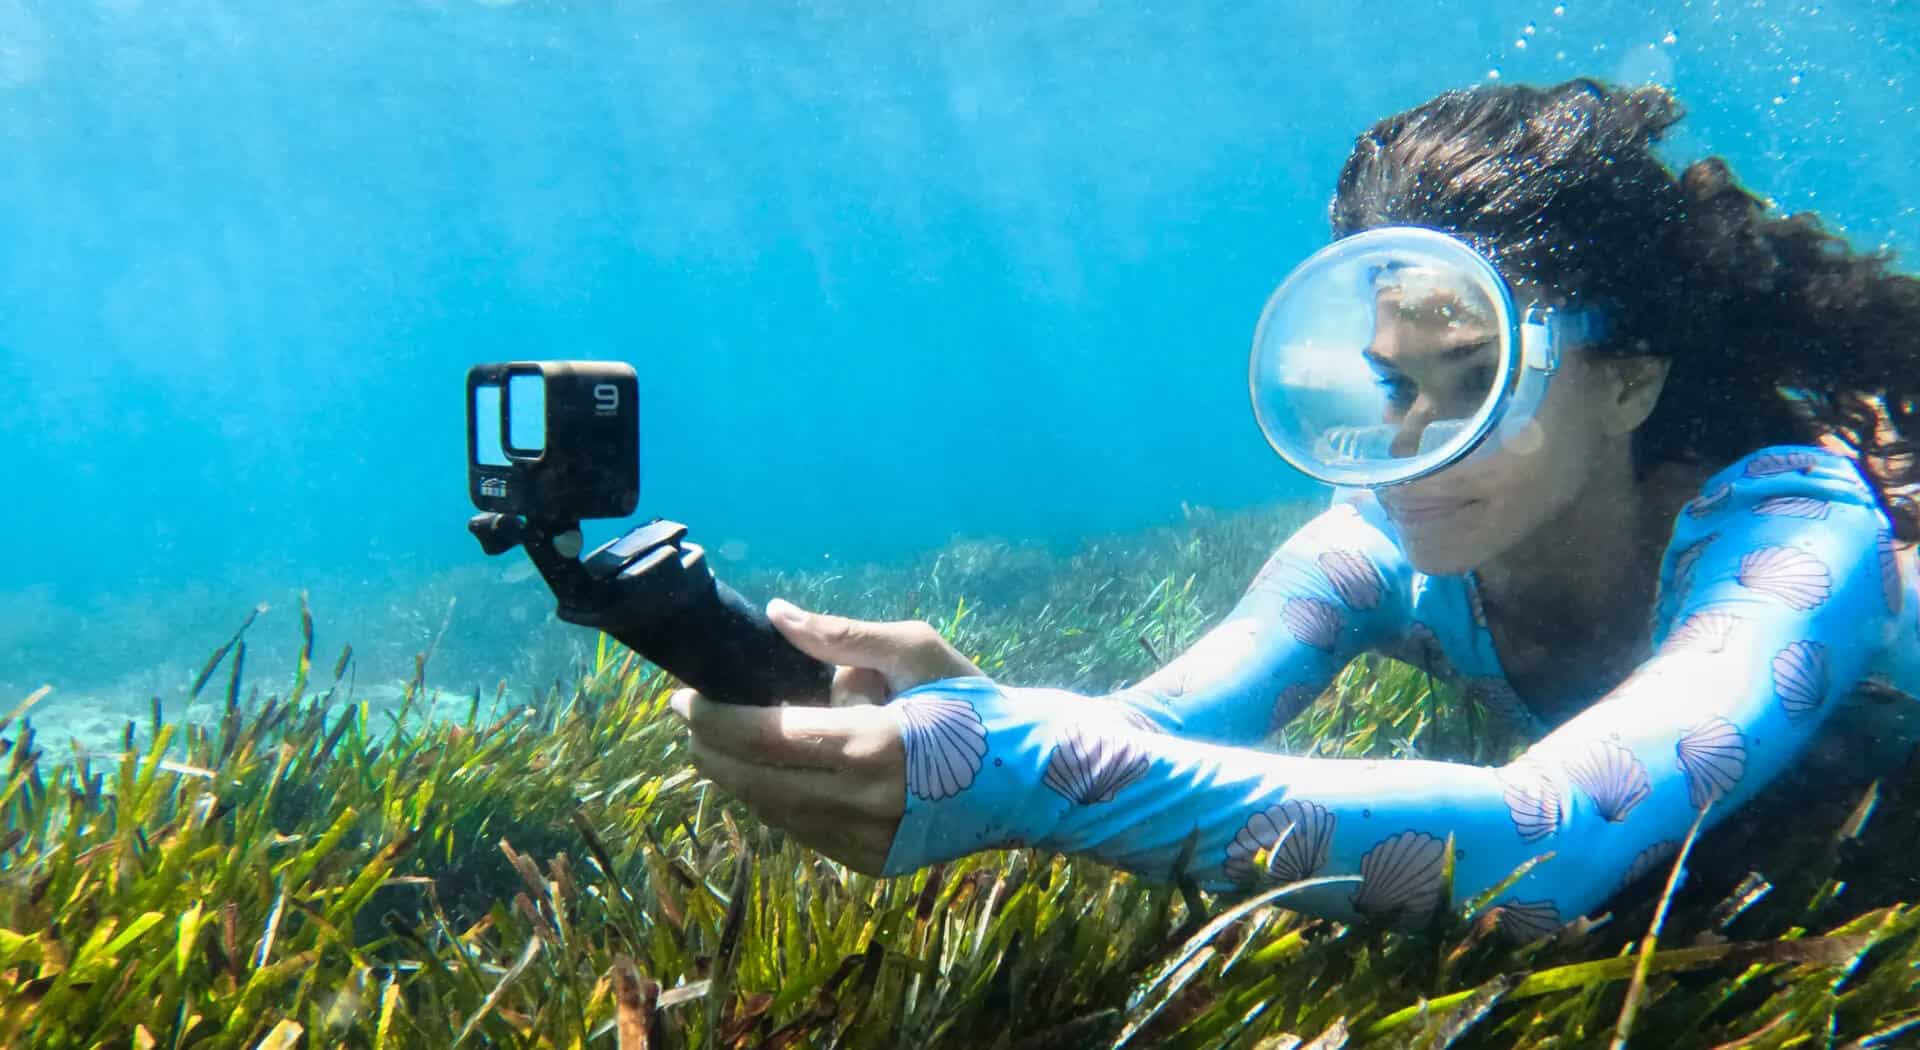 A woman in a blue wetsuit is using an underwater camera.